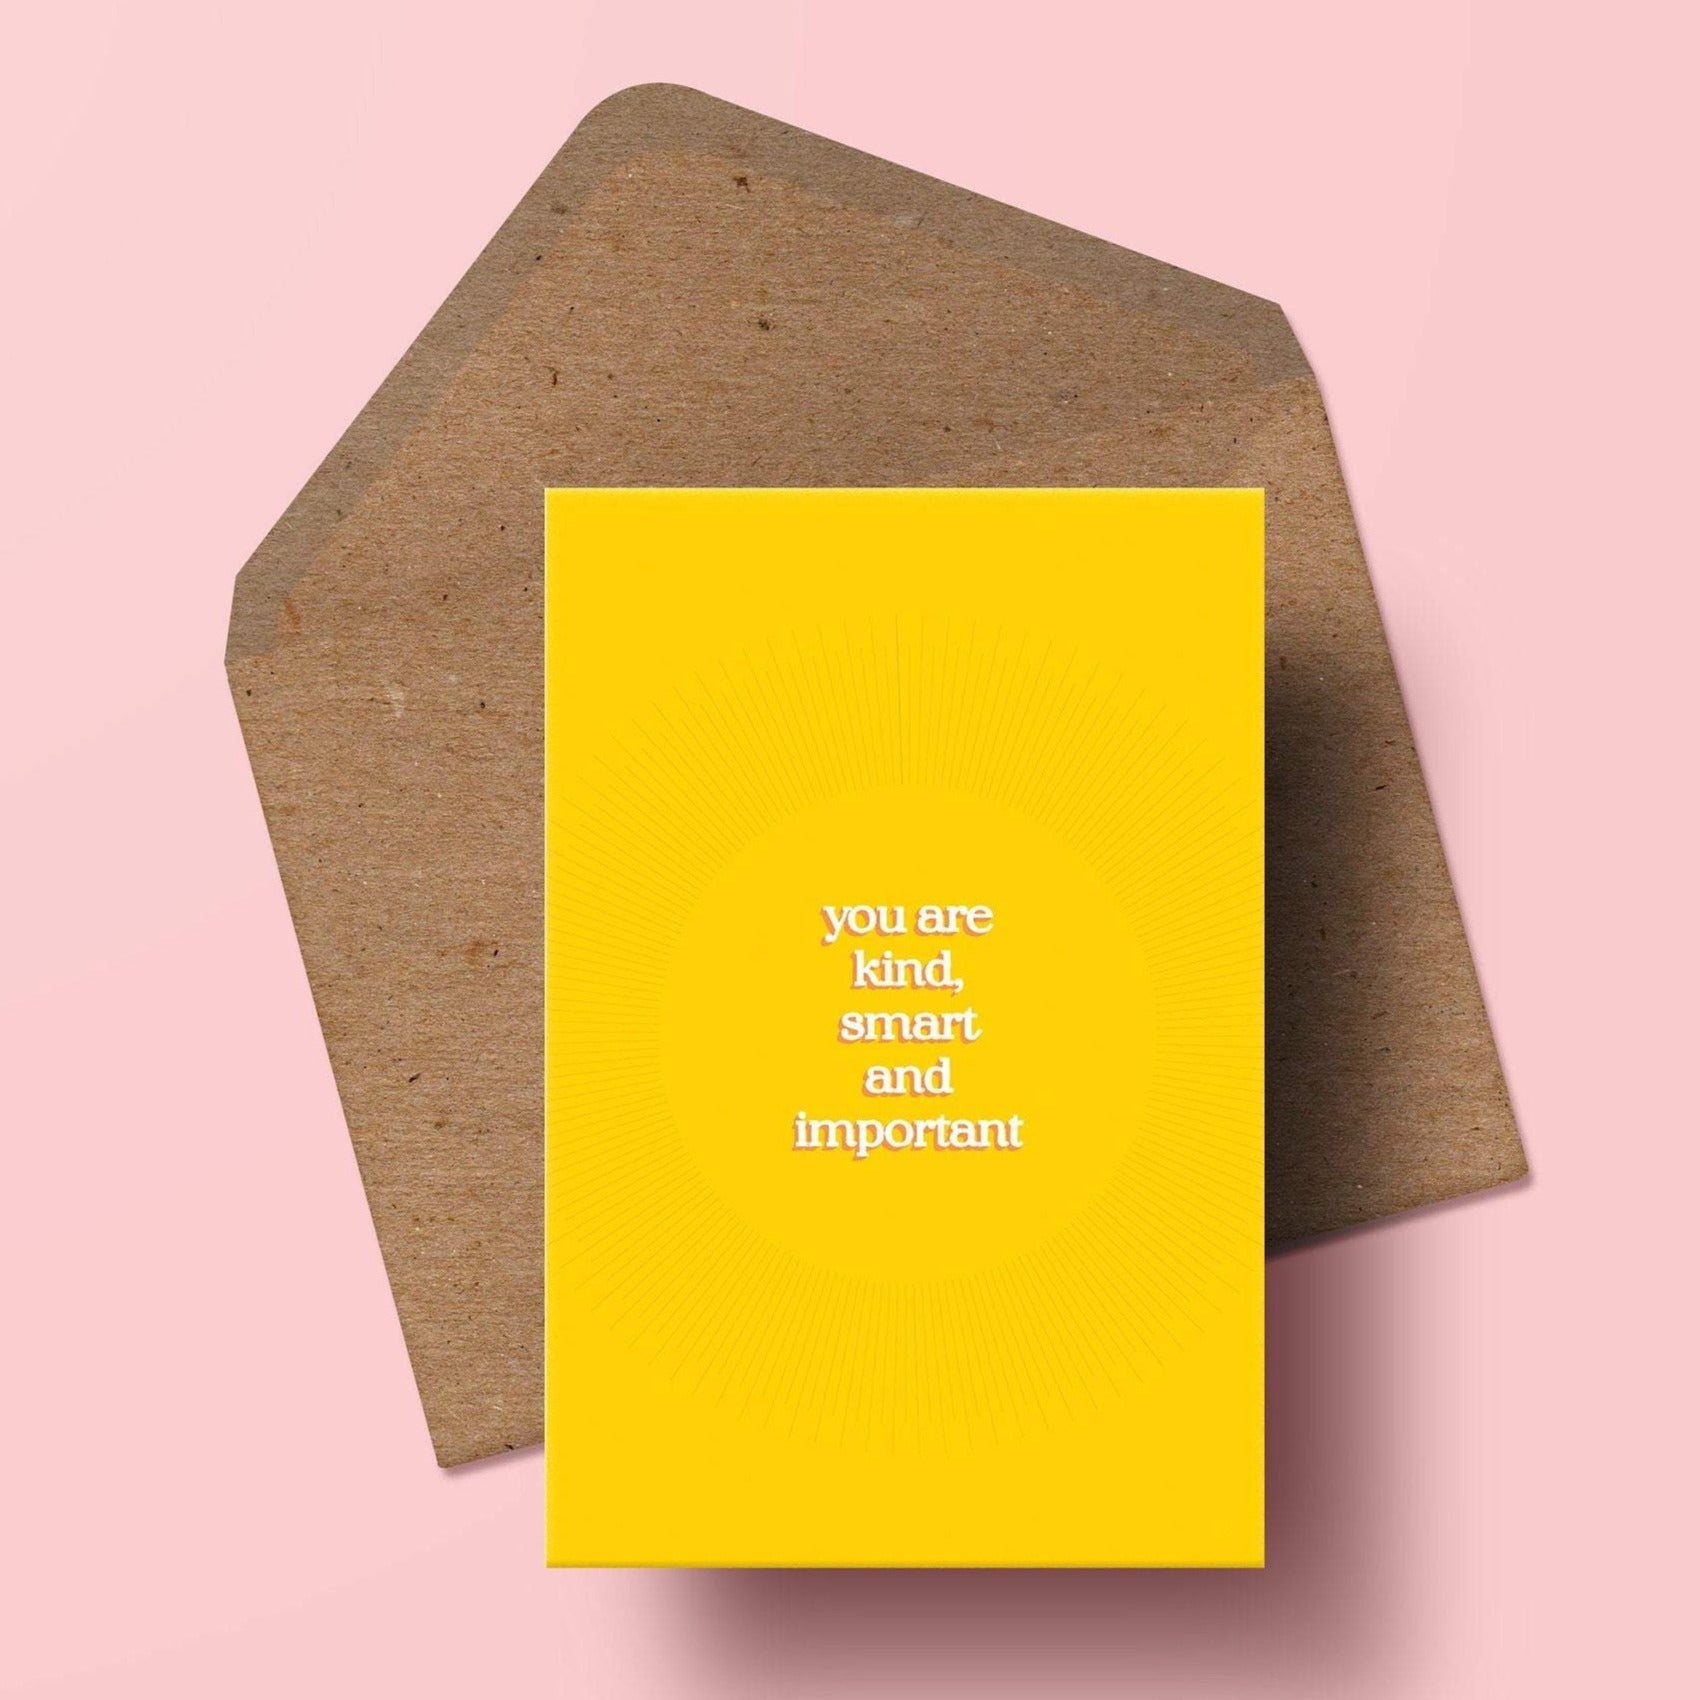 an image of a card featuring typographic print with the words 'you are kind, smart and important' overlaid onto a yellow background with subtle sunburst detailing. the card is sat on top of a kraft envelope.